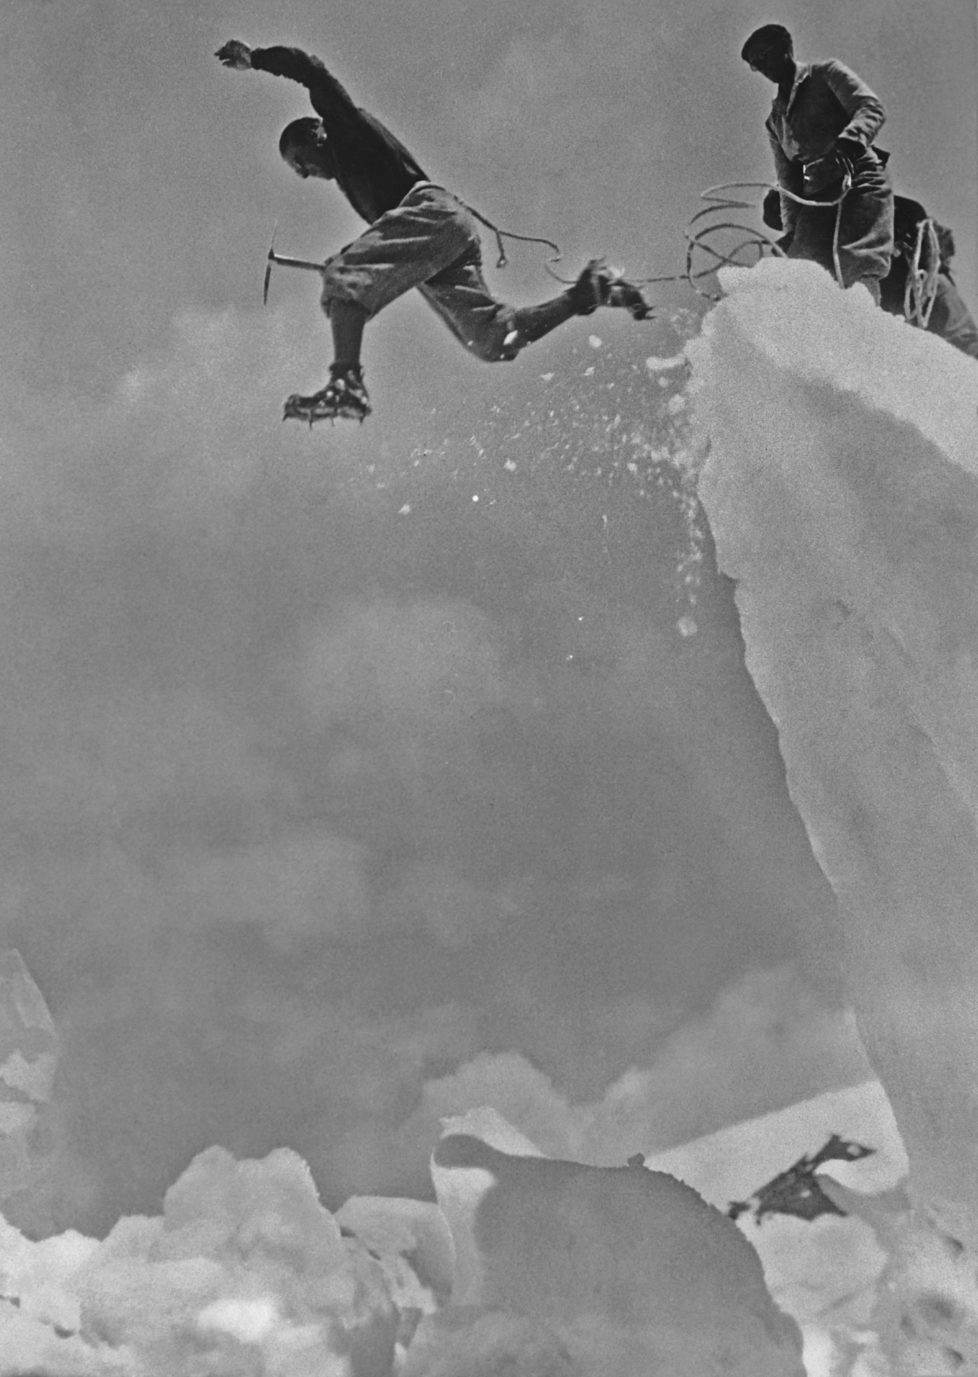 A Swiss mountaineer leaps over a crevasse in the Swiss Alps, 5th December 1930. (Photo by Henry Miller News Picture Service/Archive Photos/Getty Images)